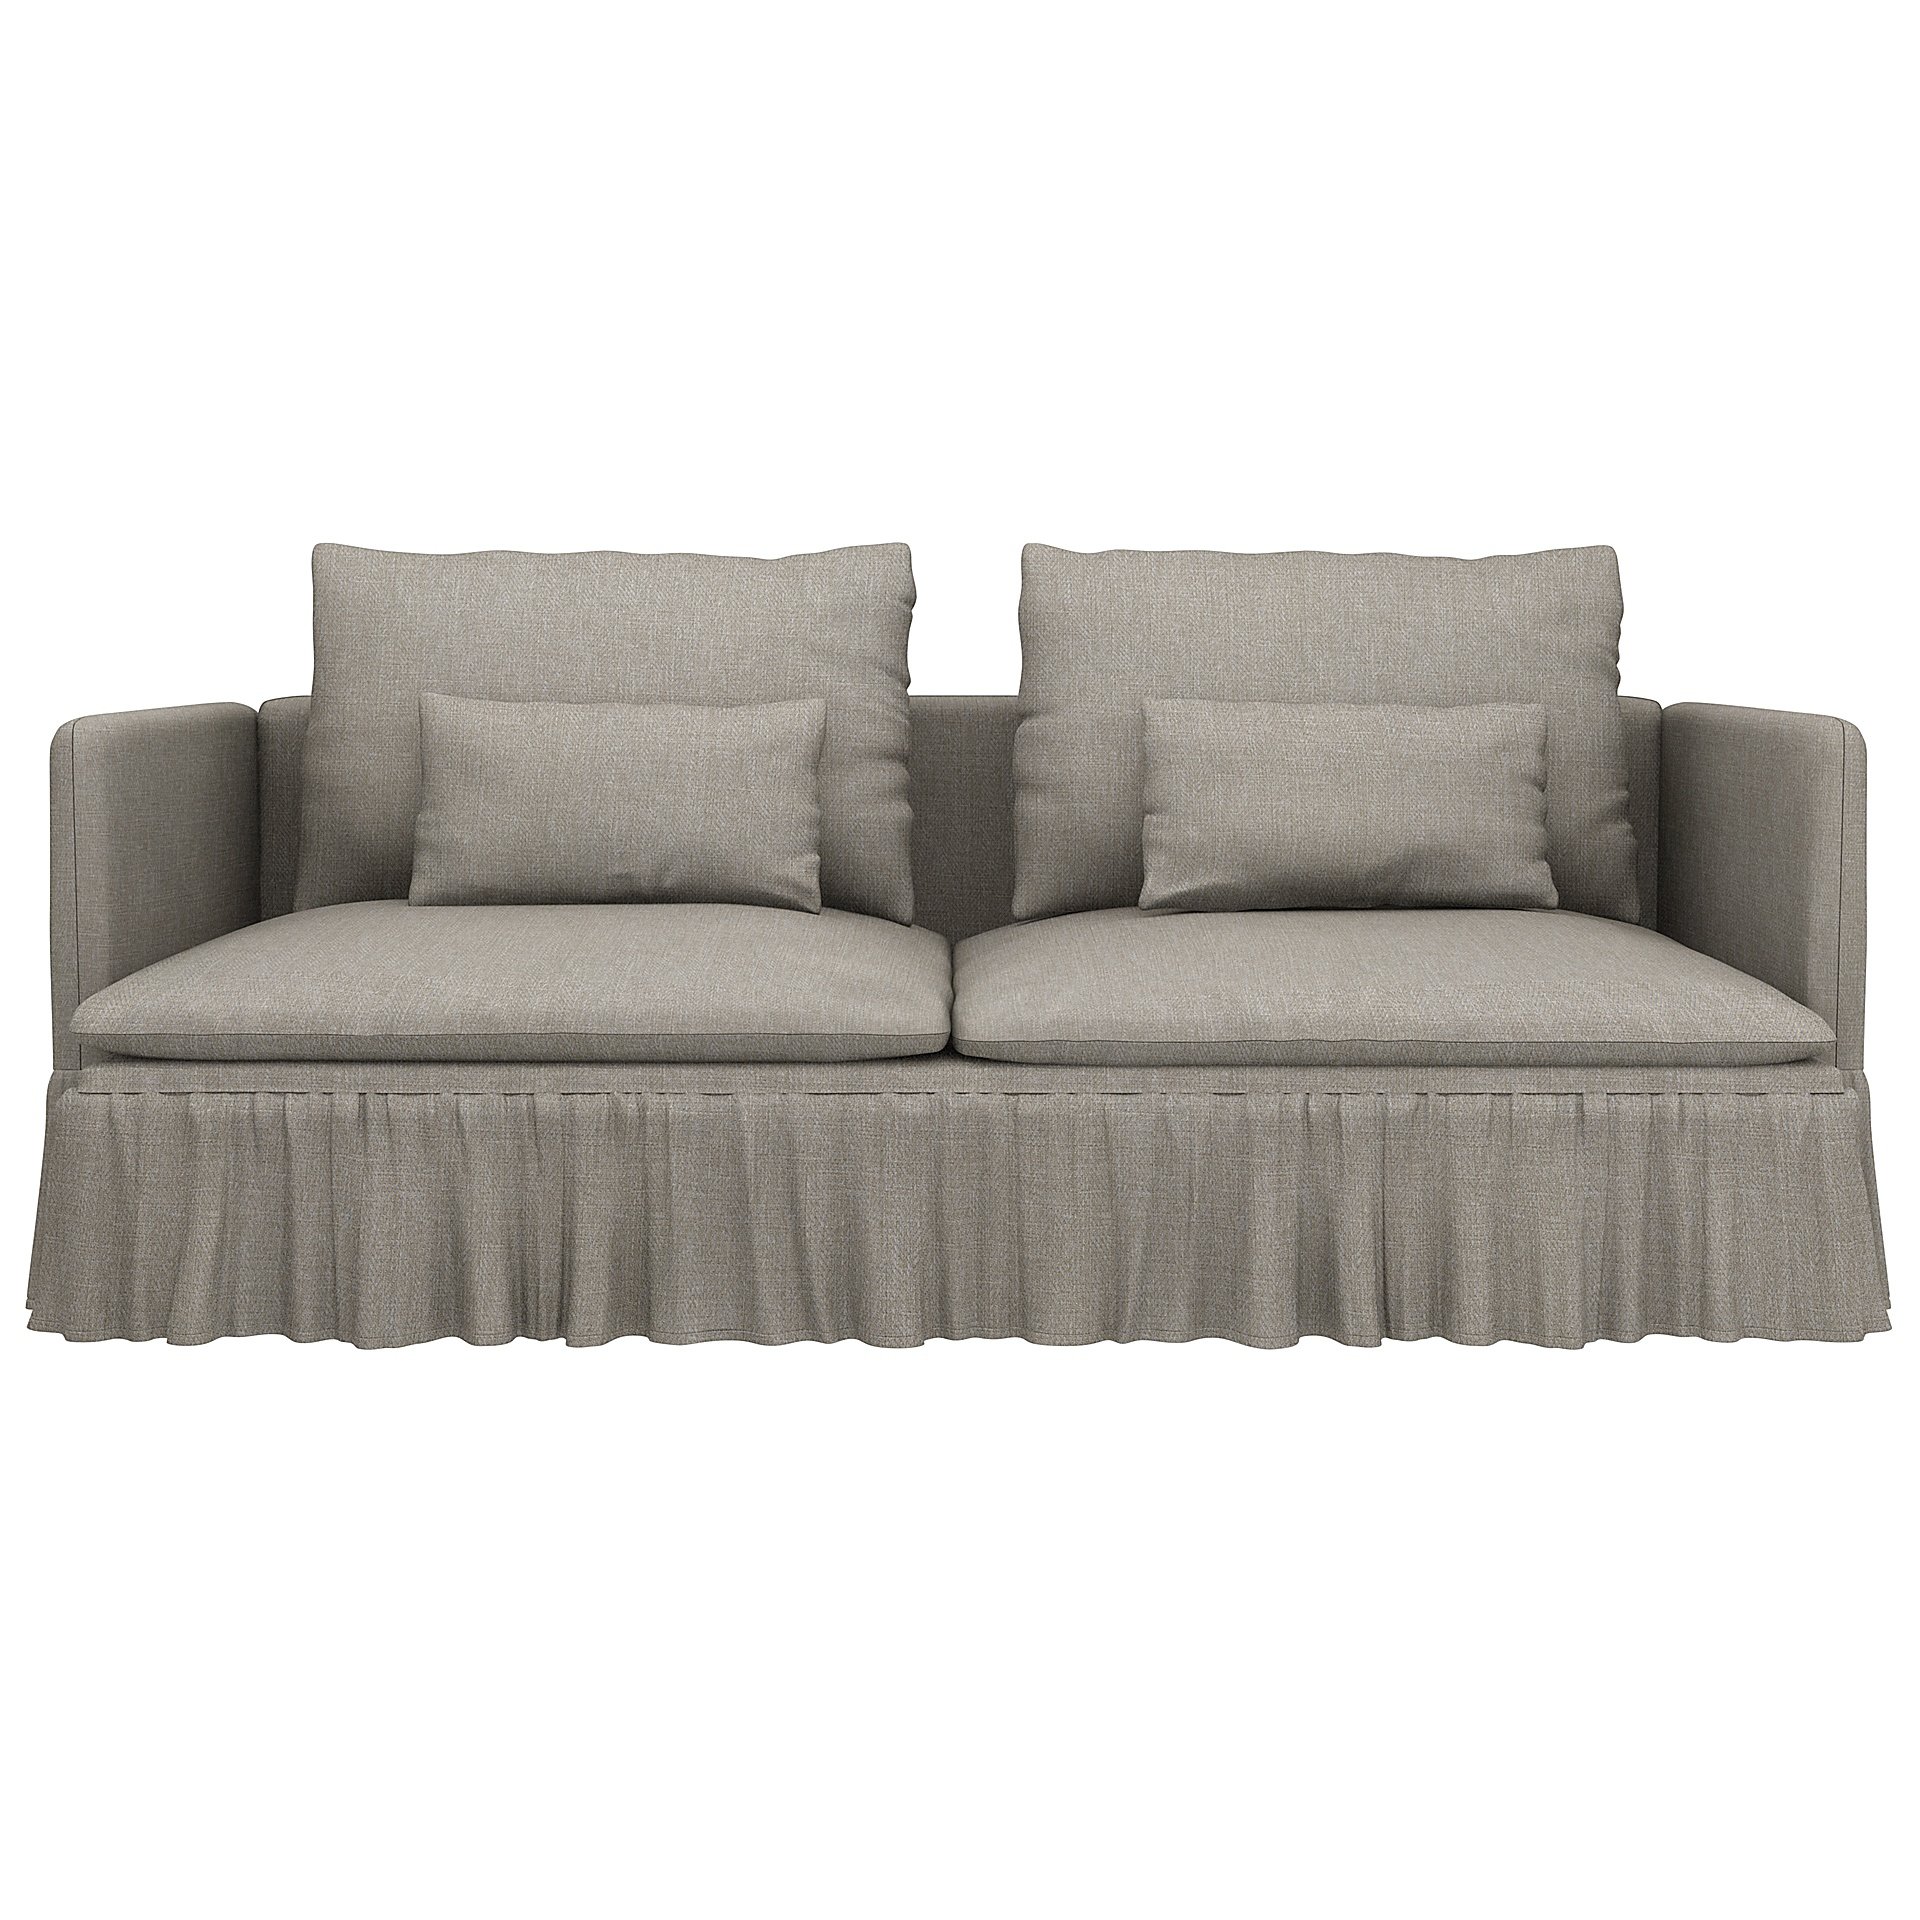 IKEA - Soderhamn 3 seater sofa with armrests cover, Greige, Boucle & Texture - Bemz